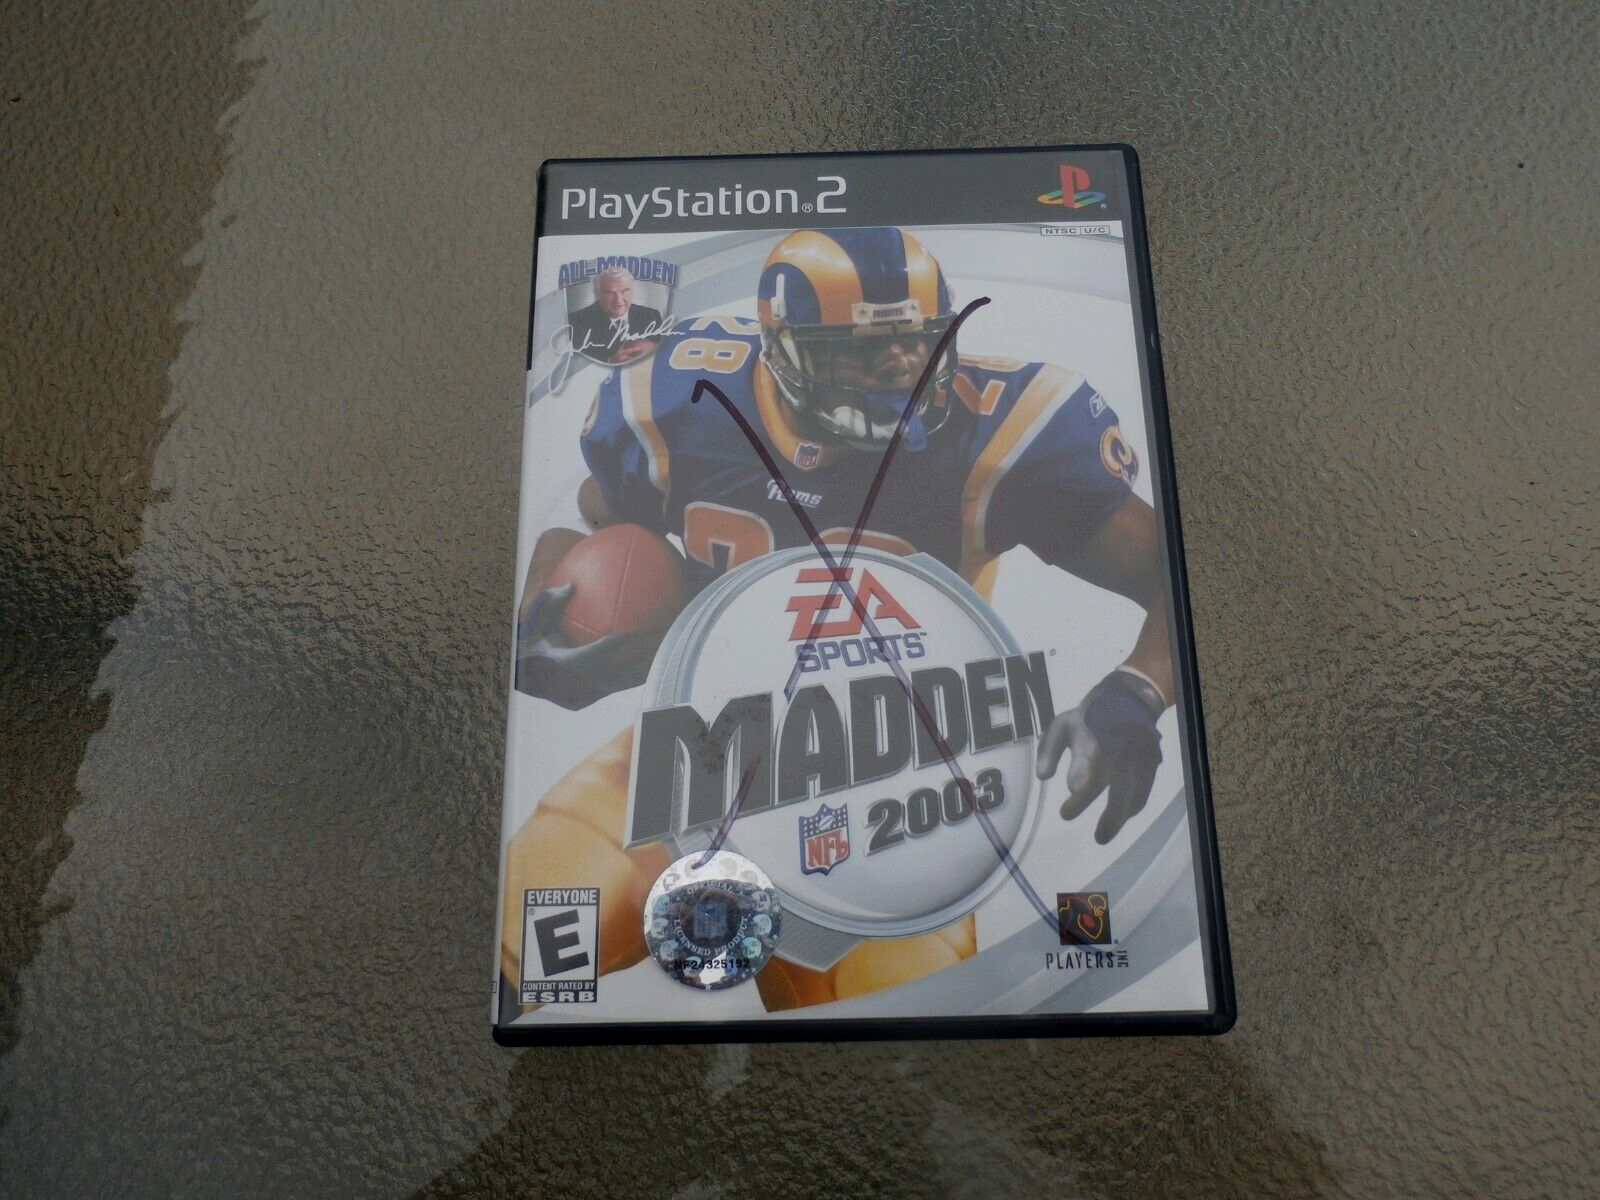 Primary image for DVD-Madden NFL 2003 (Sony PlayStation 2, 2002)